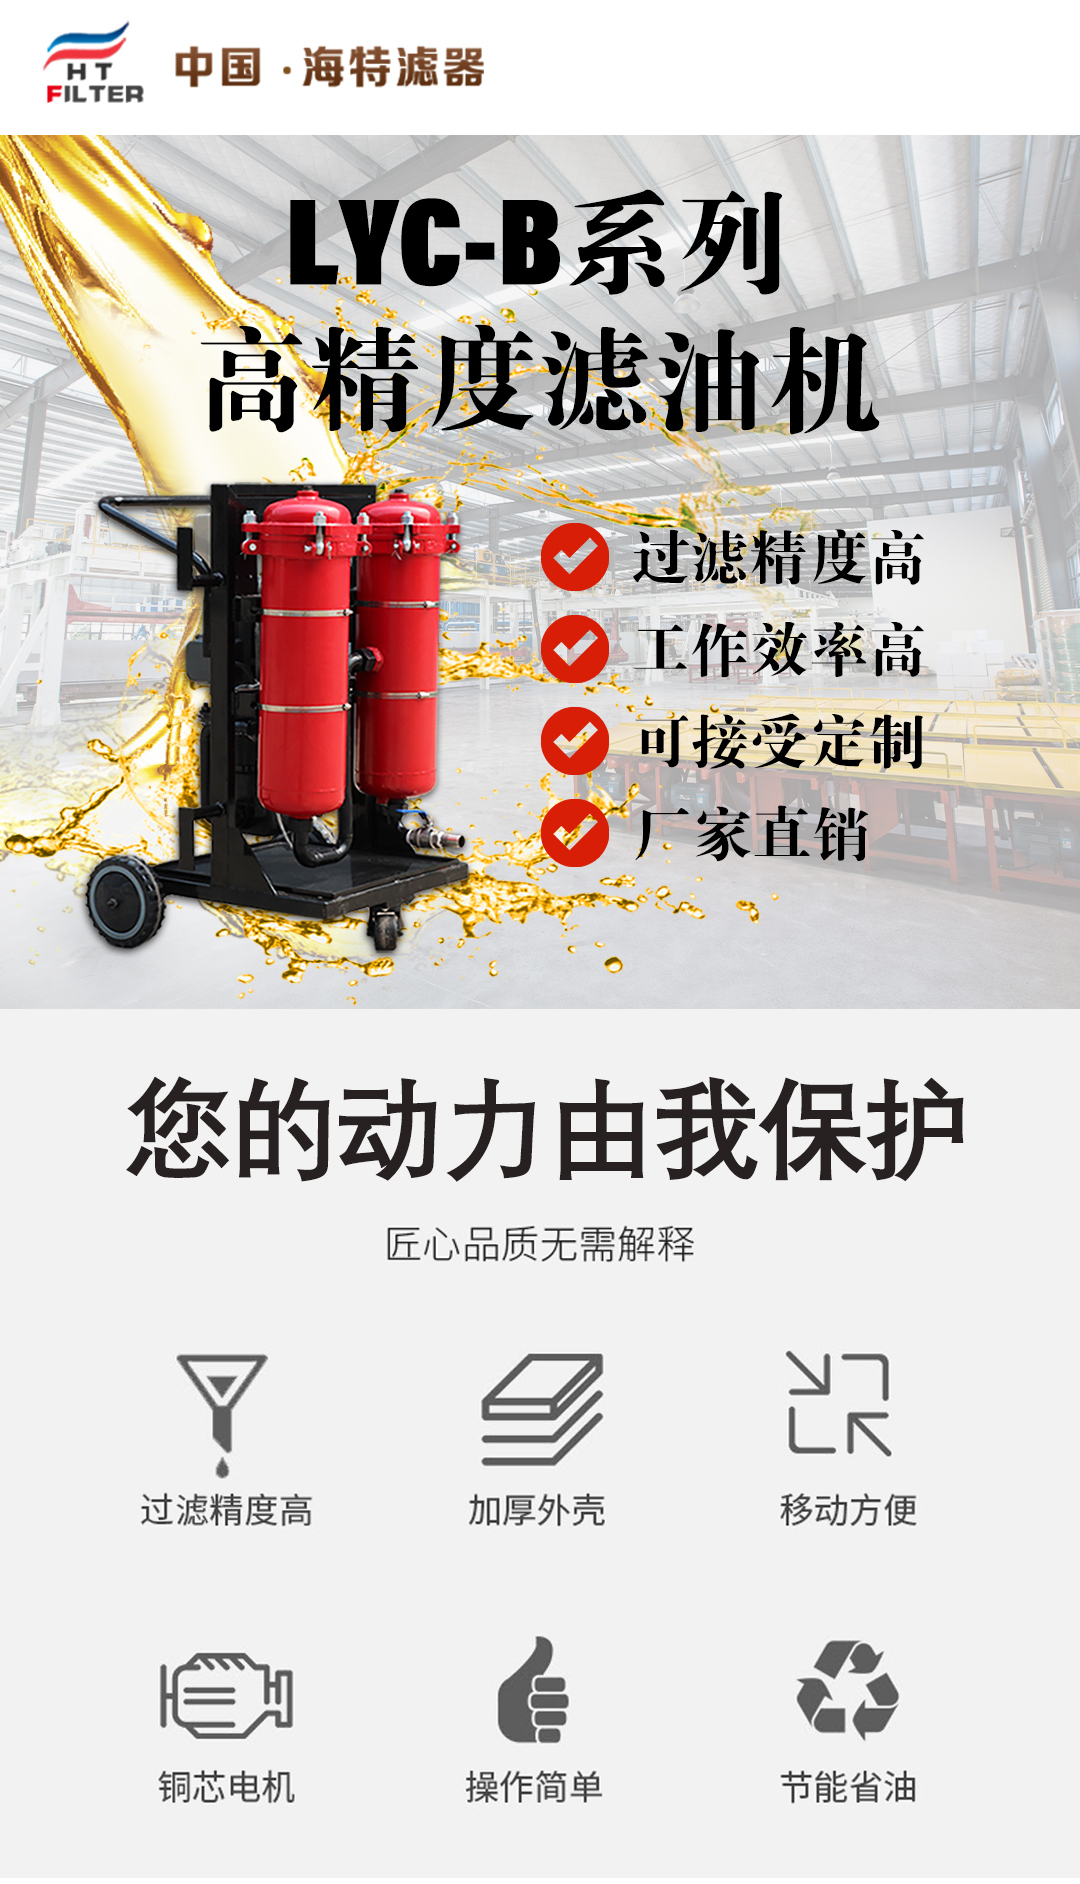 Hydraulic Mobile Fuel Dispenser PFC8314-100-H-CP in Continuous Casting Workshop with a Filtering Accuracy of 5um Oil Filter Trolley